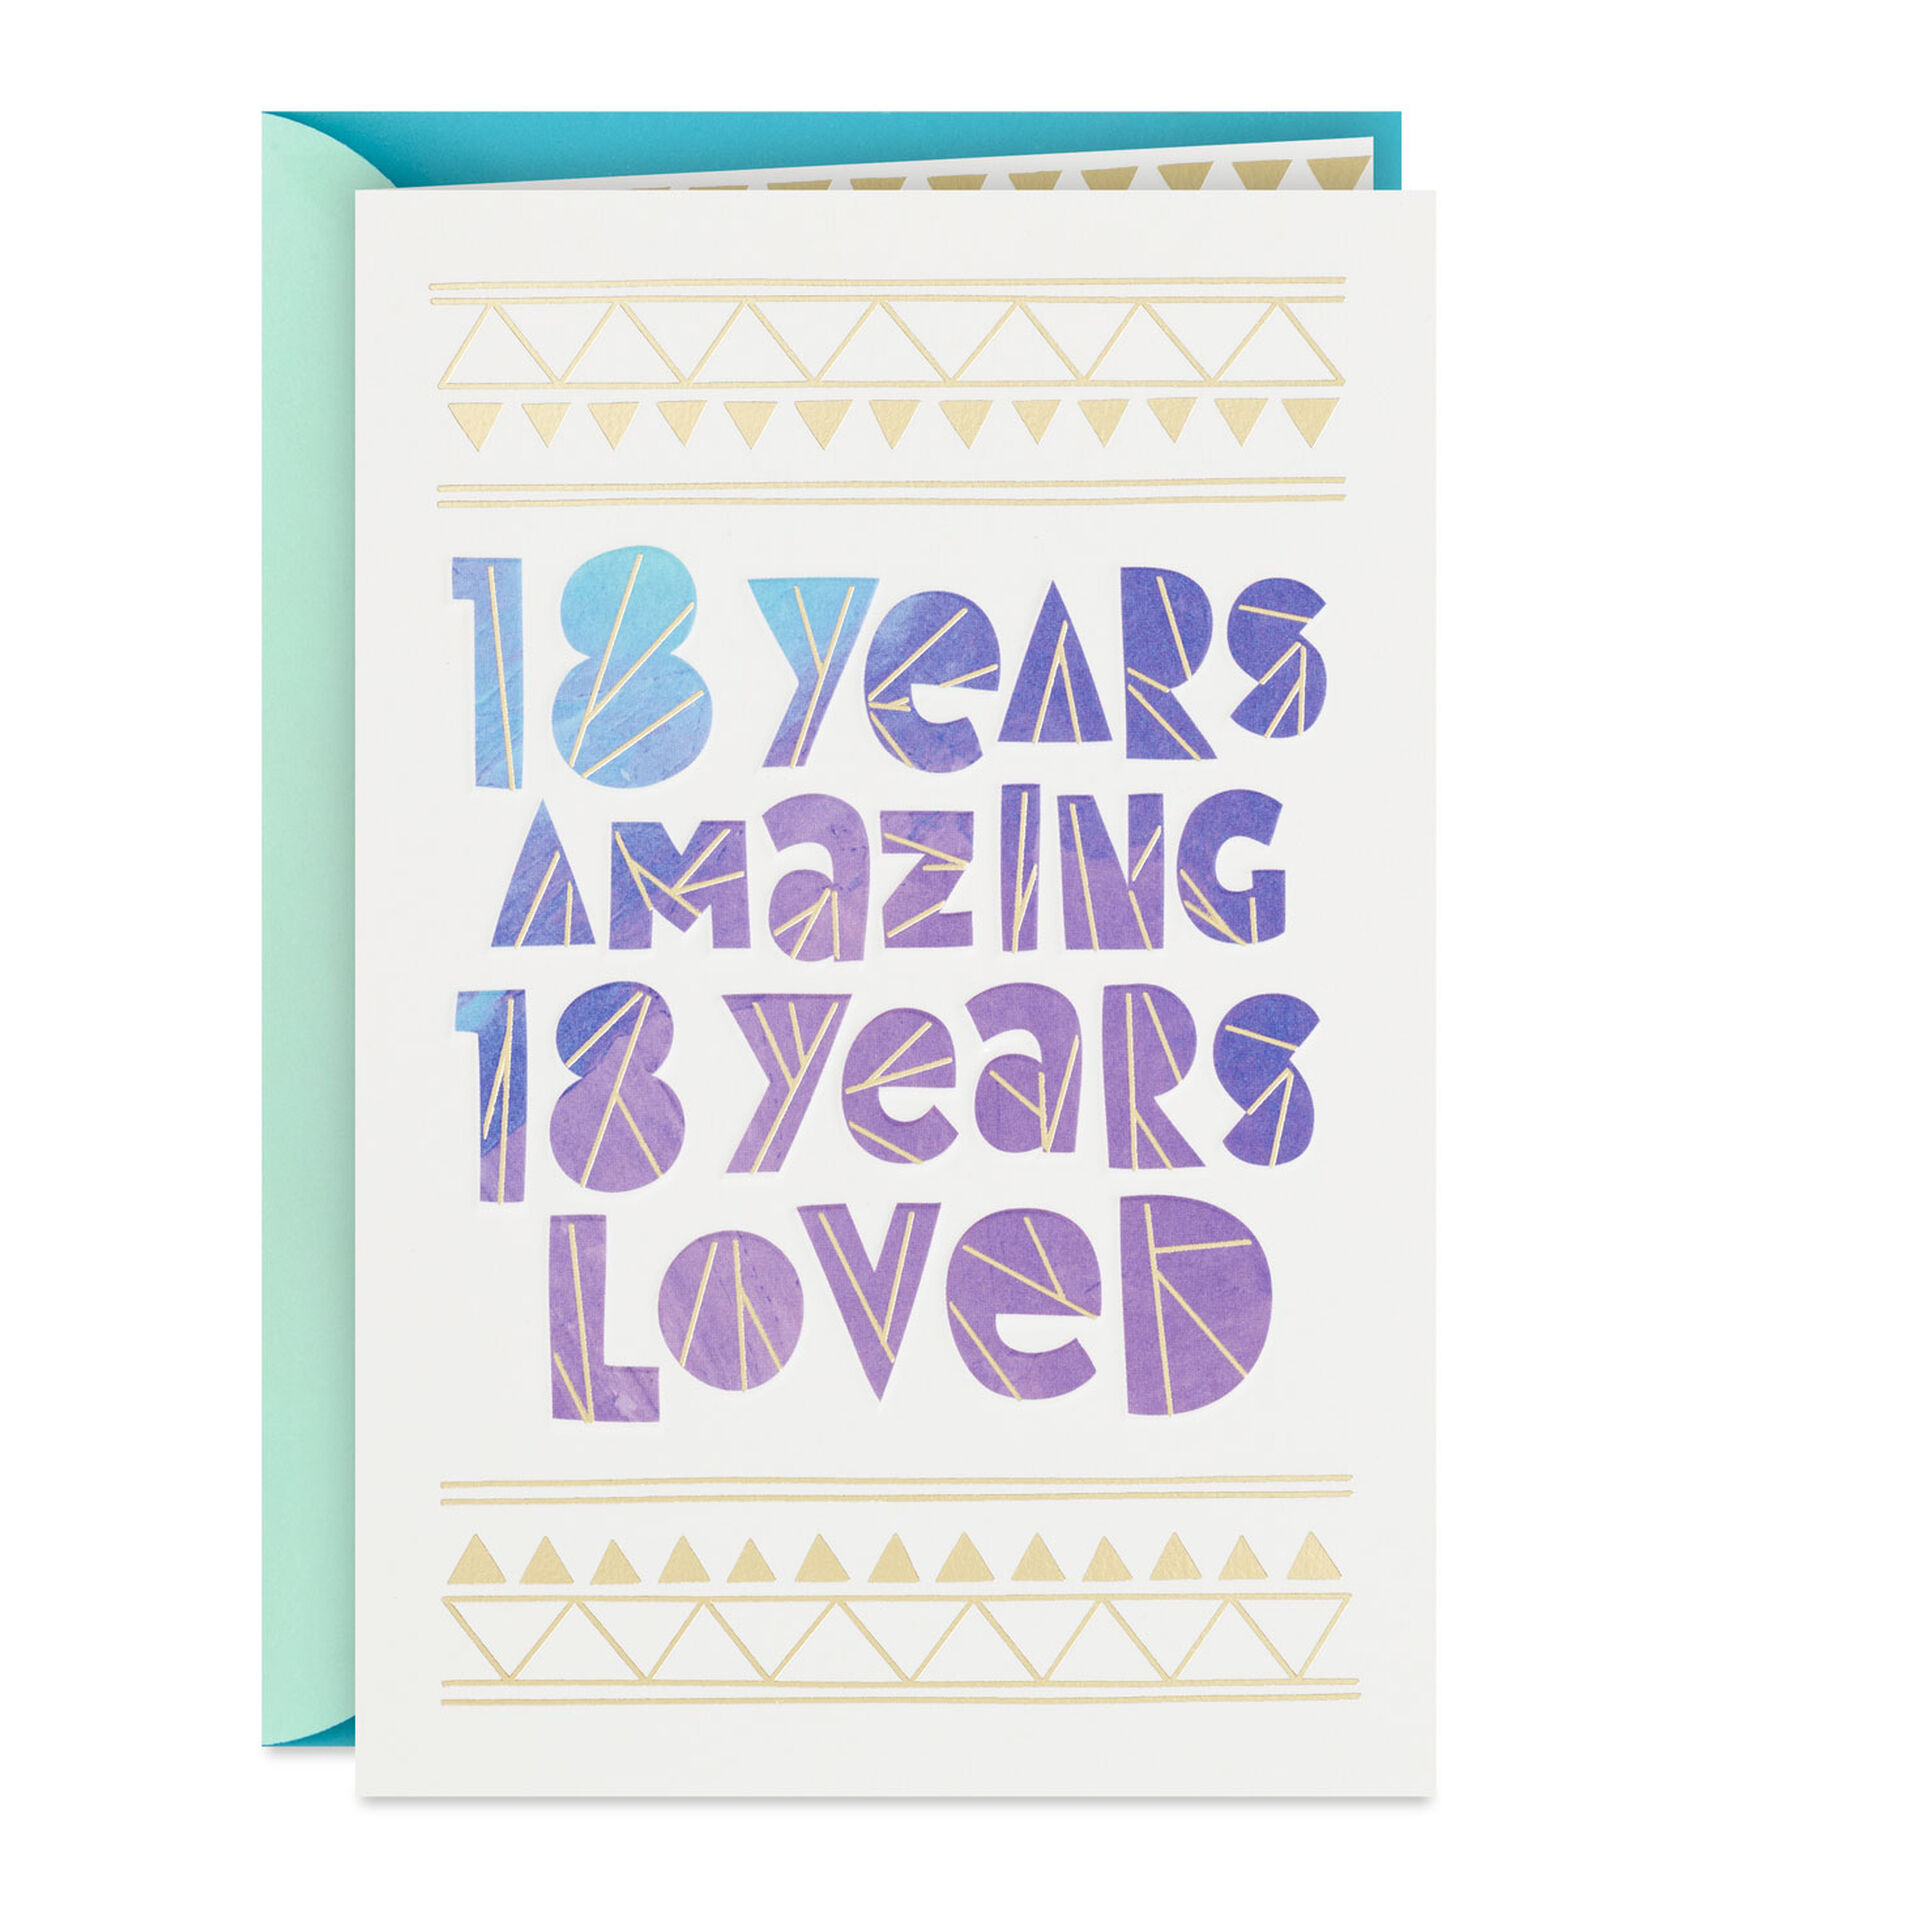 Loved-and-Amazing-18th-Birthday-Card_359HBD2899_01